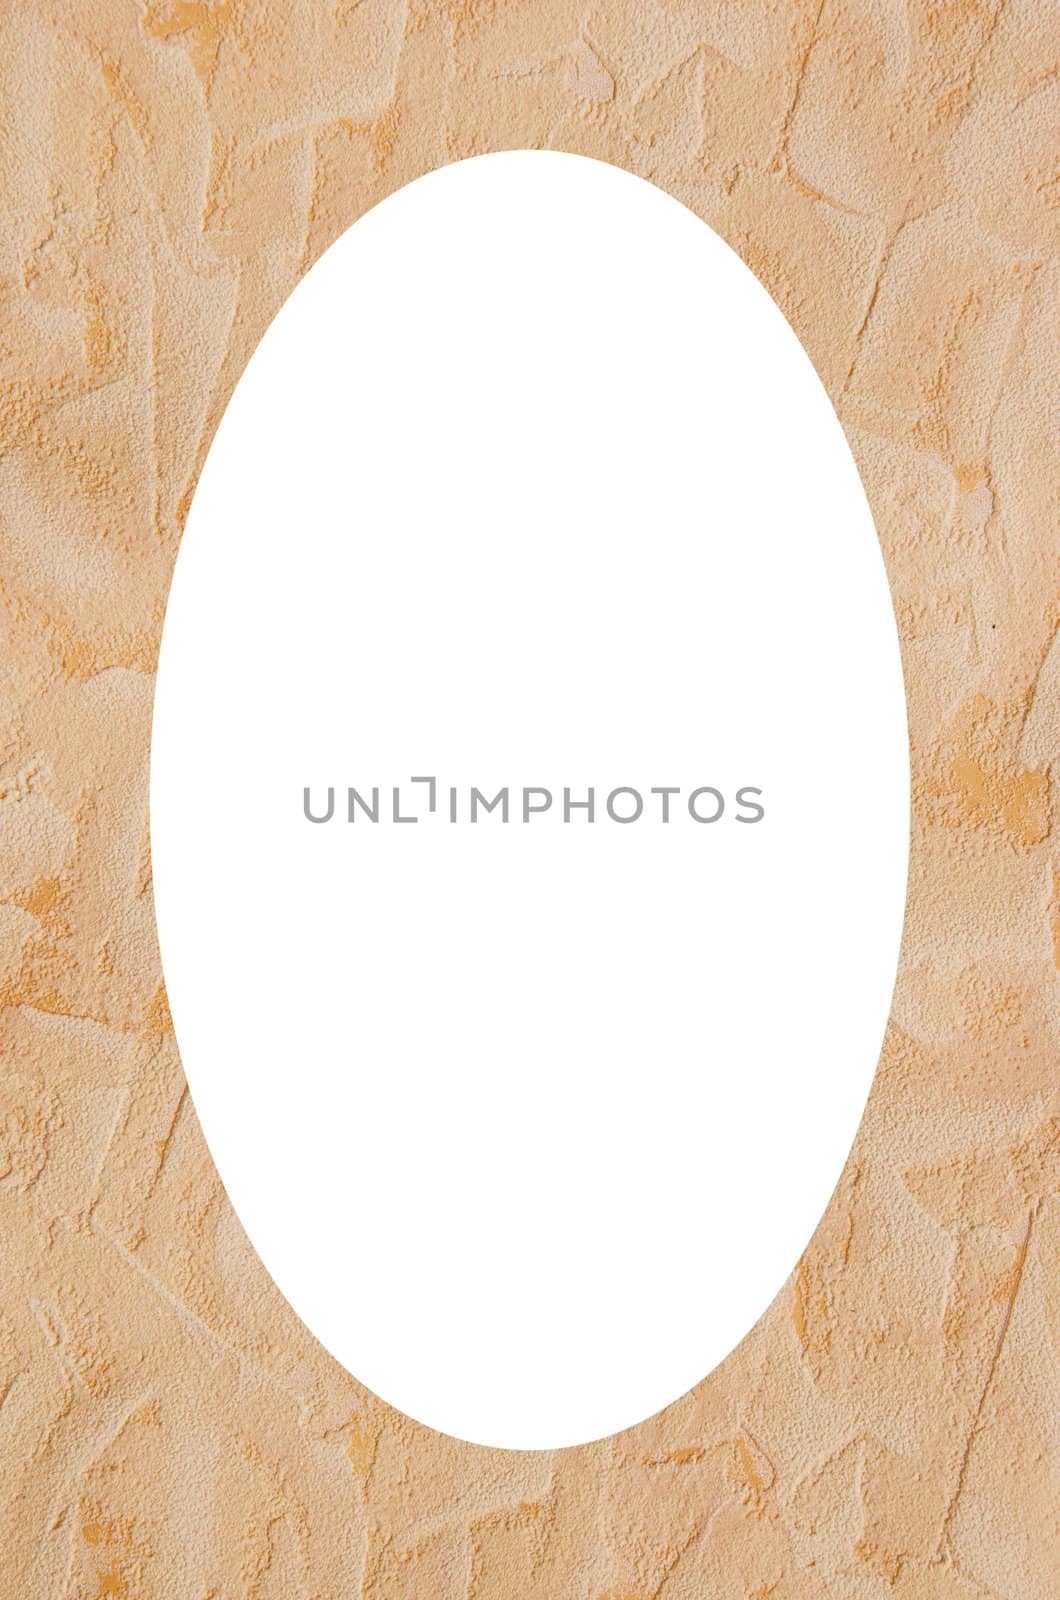 Gray and white wallpaper background with relief ornaments. Isolated white oval place for text photograph image in center of frame.